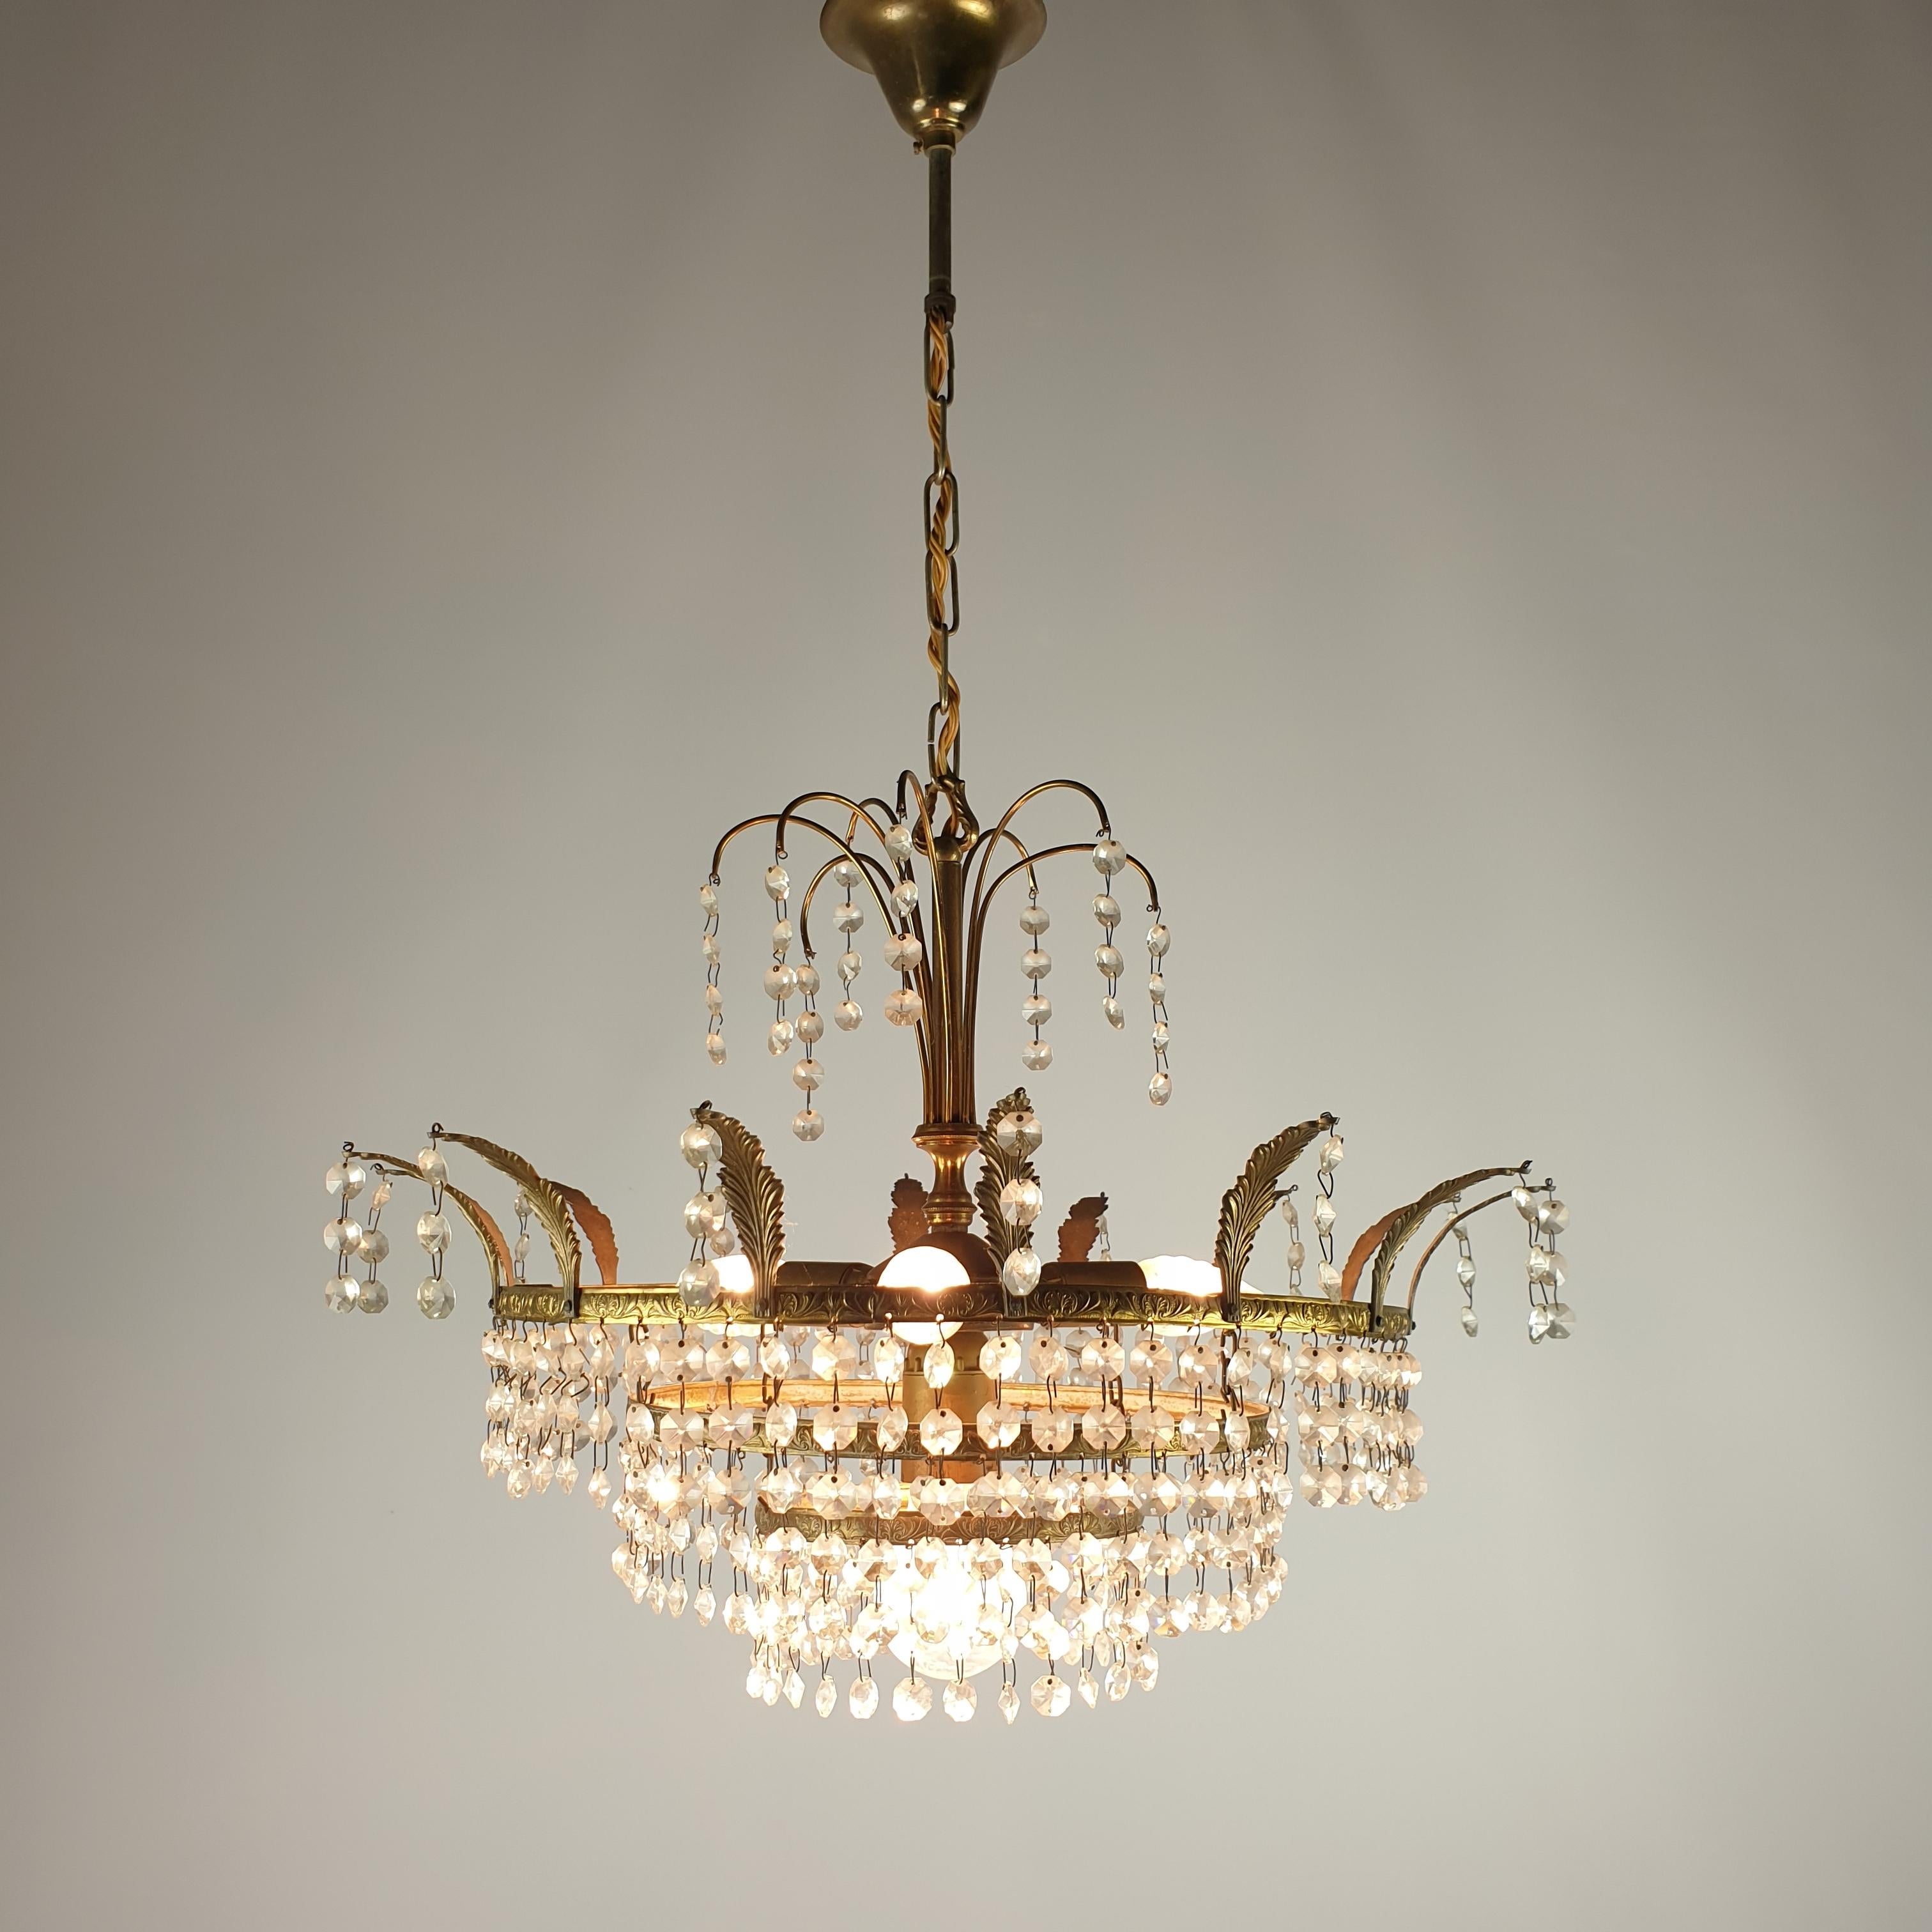 20th Century French Empire Style Crystal Glass and Brass Chandelier, 1920's For Sale